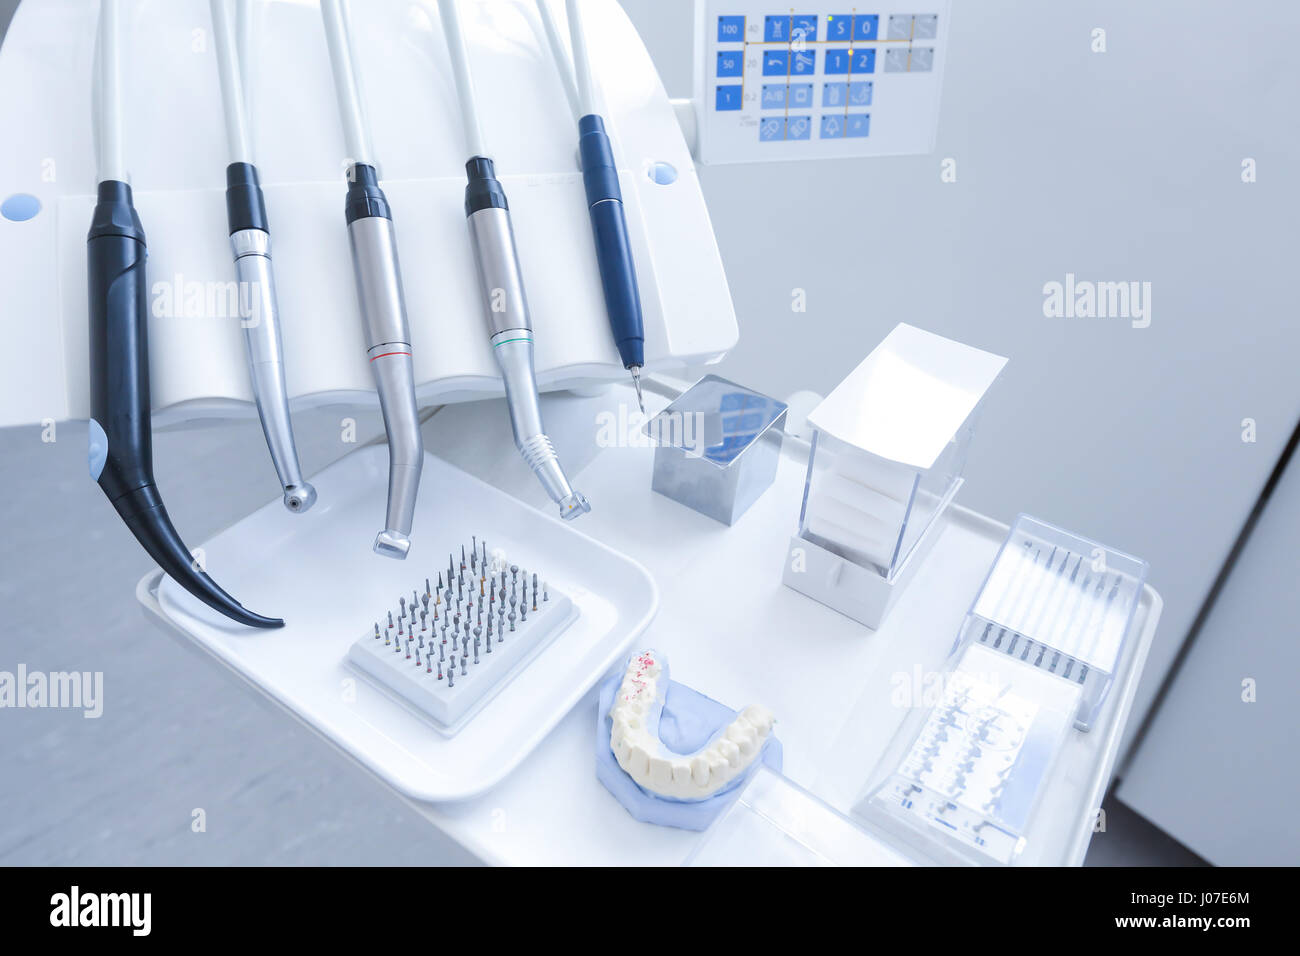 Dental practice - specialist tools, drills, handpieces and laser with polish nozzles, drill nozzles and denture model in the foreground Stock Photo